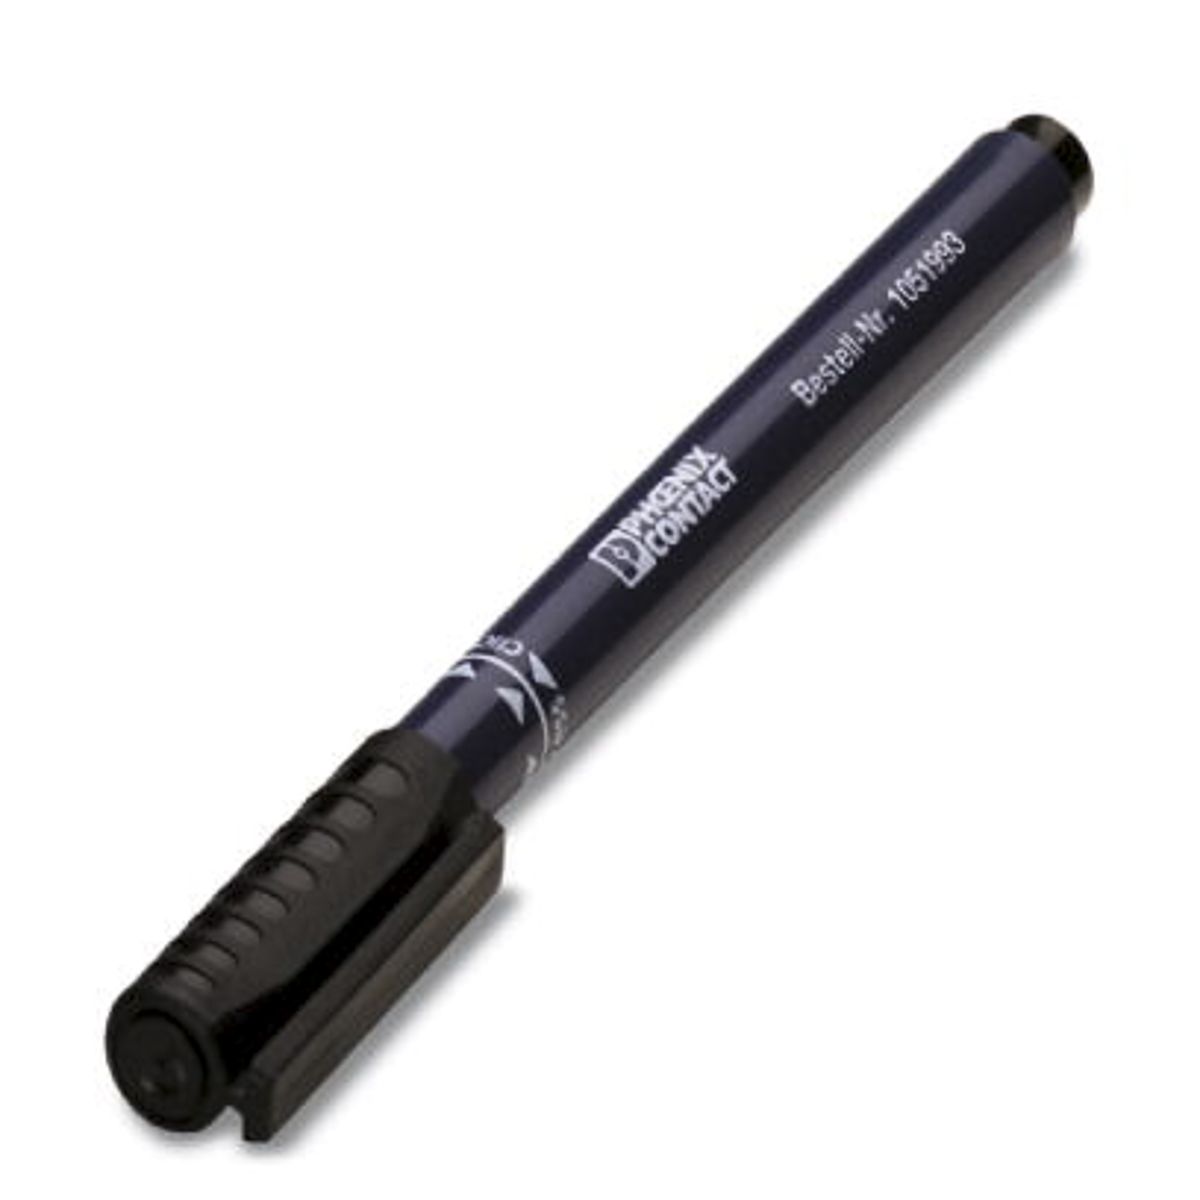 Phoenix Contact, B-STIFT Marker Pen for use with Marker Strip